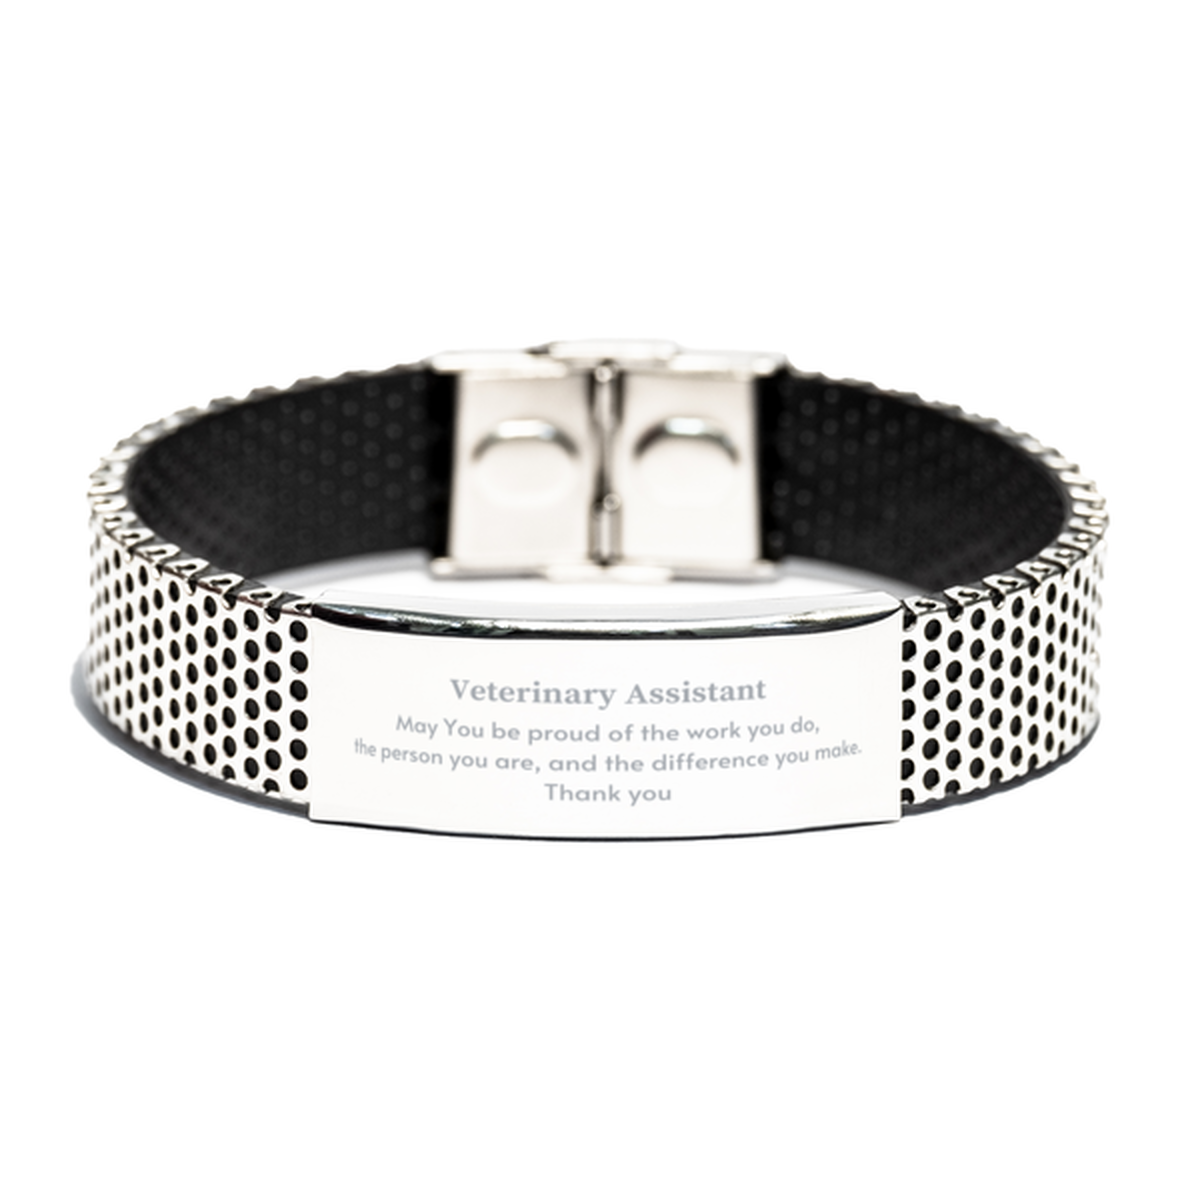 Heartwarming Stainless Steel Bracelet Retirement Coworkers Gifts for Veterinary Assistant, Veterinary Assistant May You be proud of the work you do, the person you are Gifts for Boss Men Women Friends